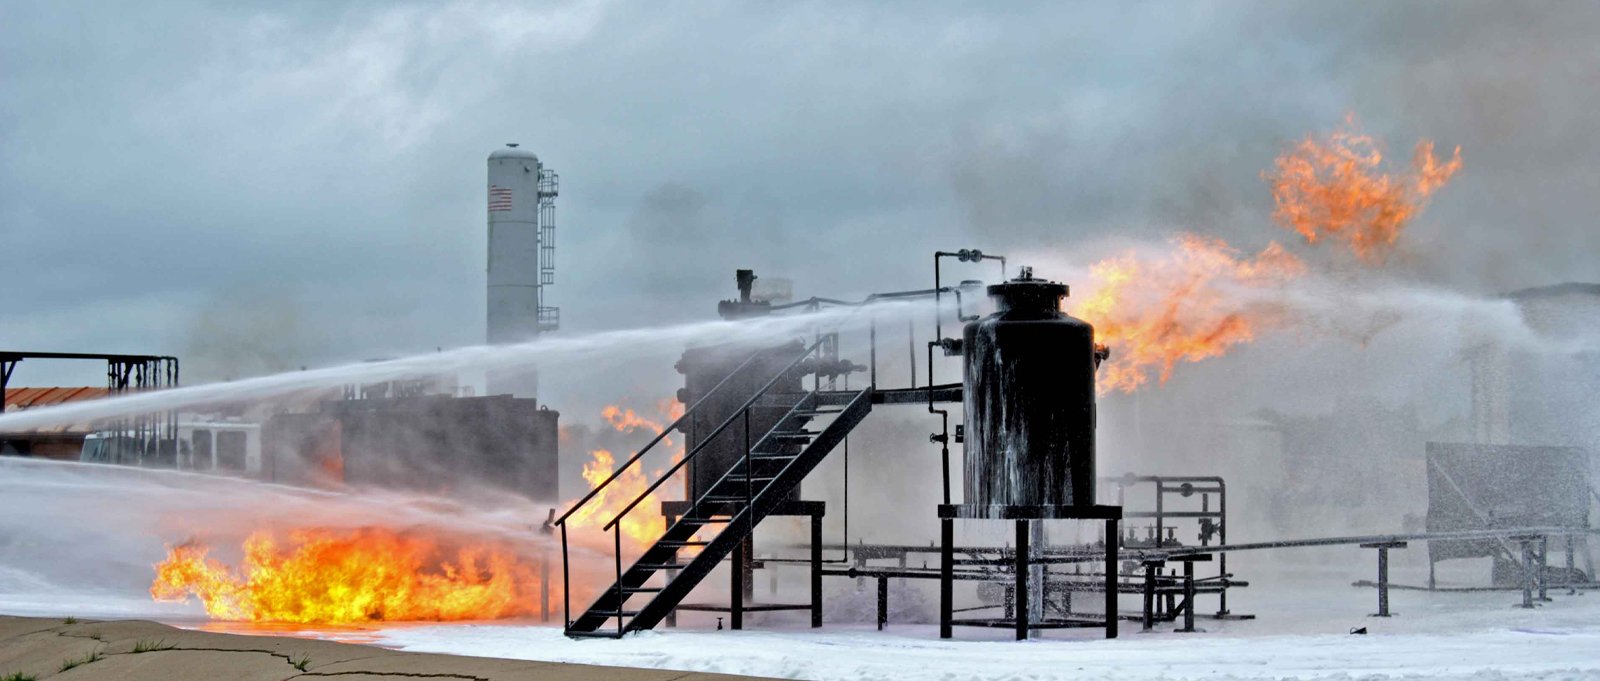 Industrial fire being actively put out and suppressed by a fire fighting foam system.